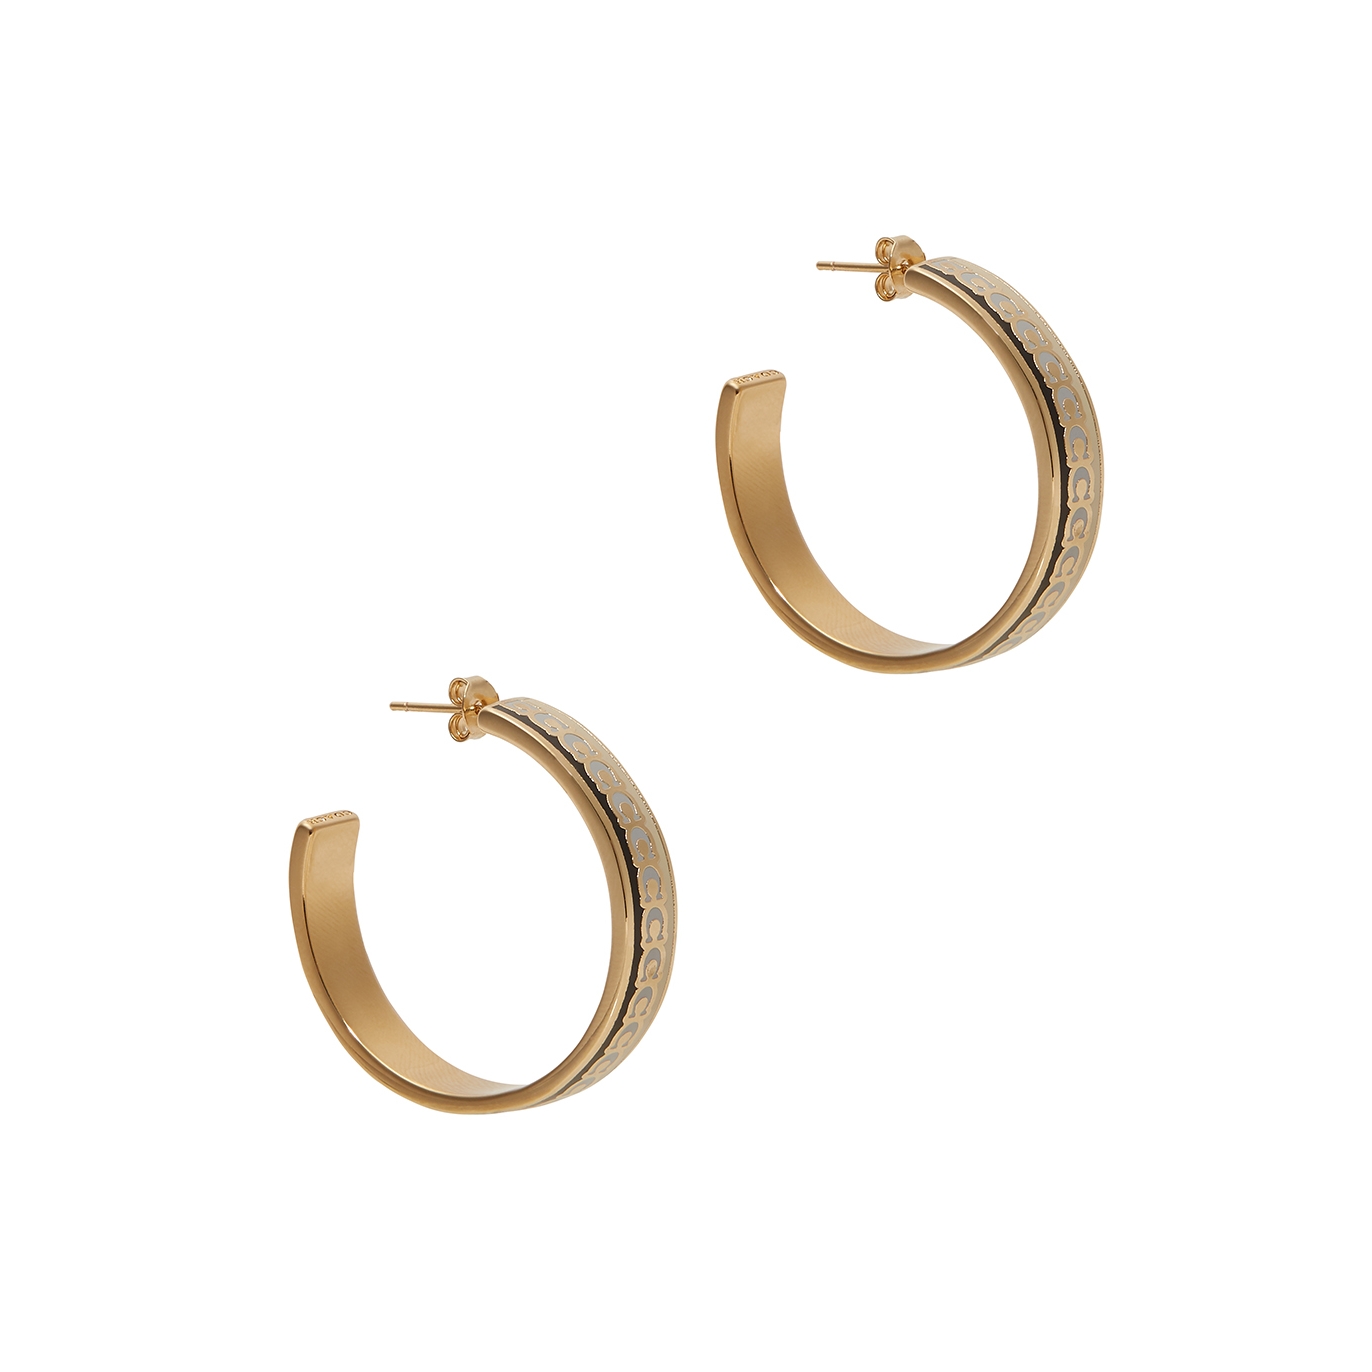 Coach Signature C Large Gold-tone Hoop Earrings - Black - One Size